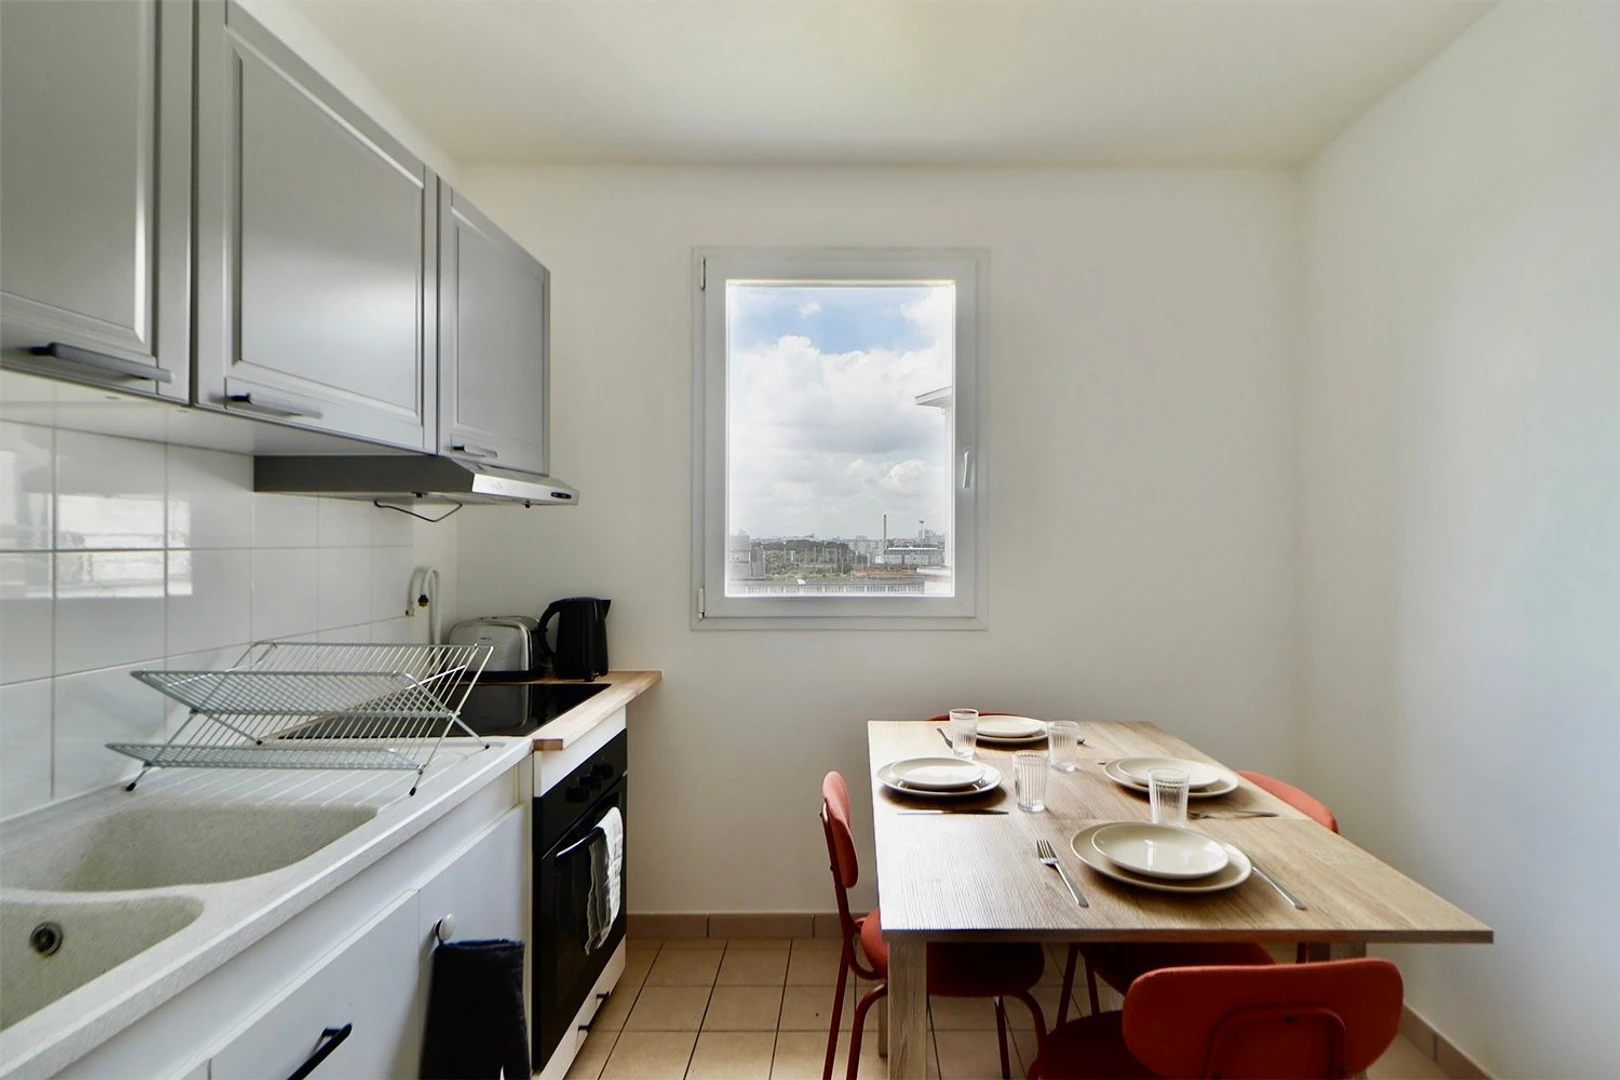 Renting rooms by the month in Saint-denis